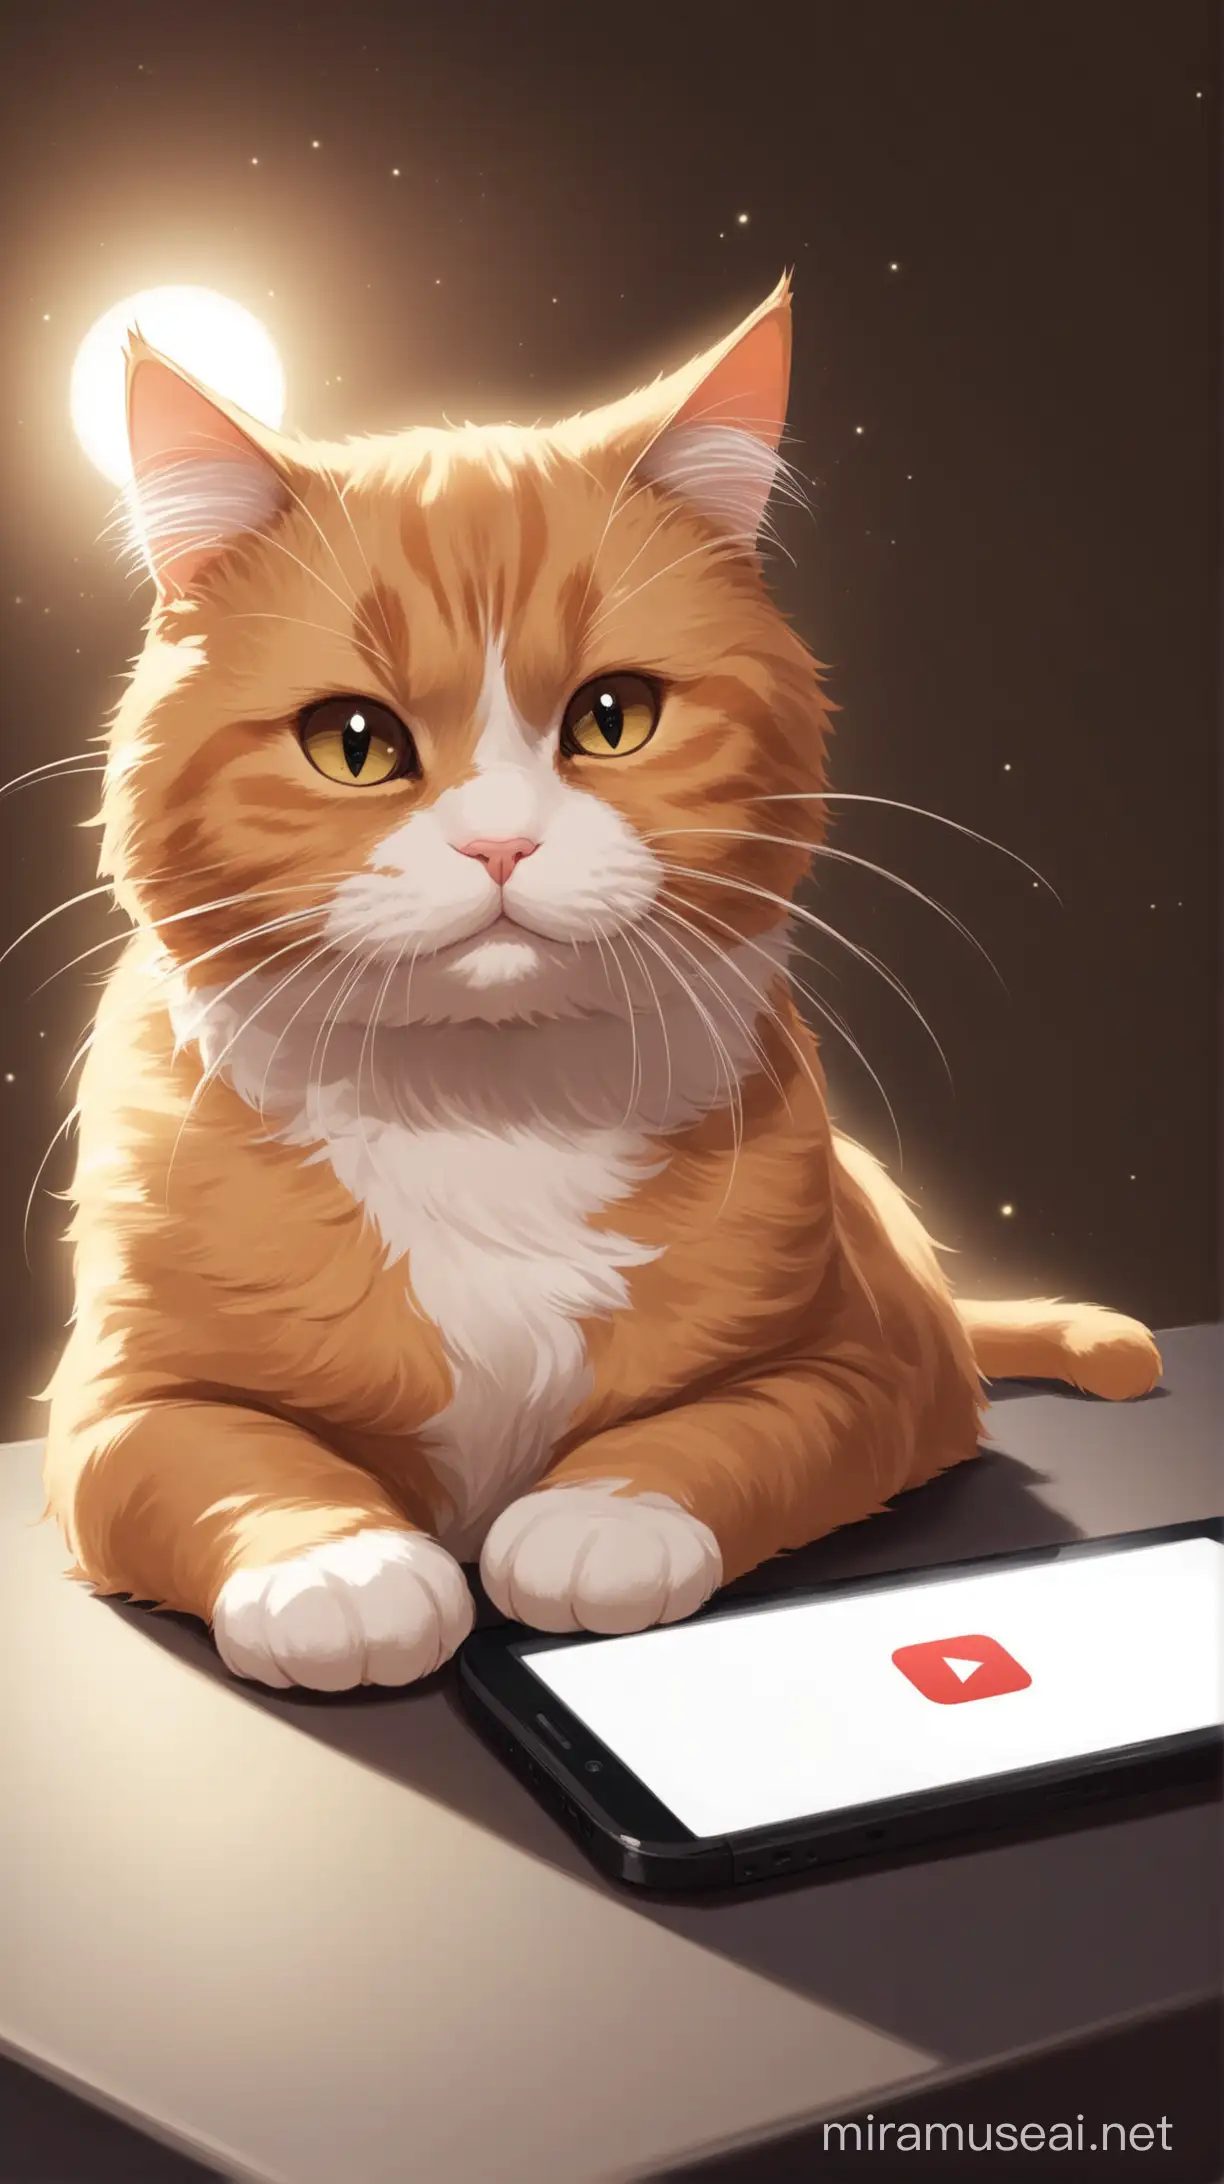 Whiskers, a cat tired of humans stealing the spotlight, starts a YouTube channel to showcase his talents